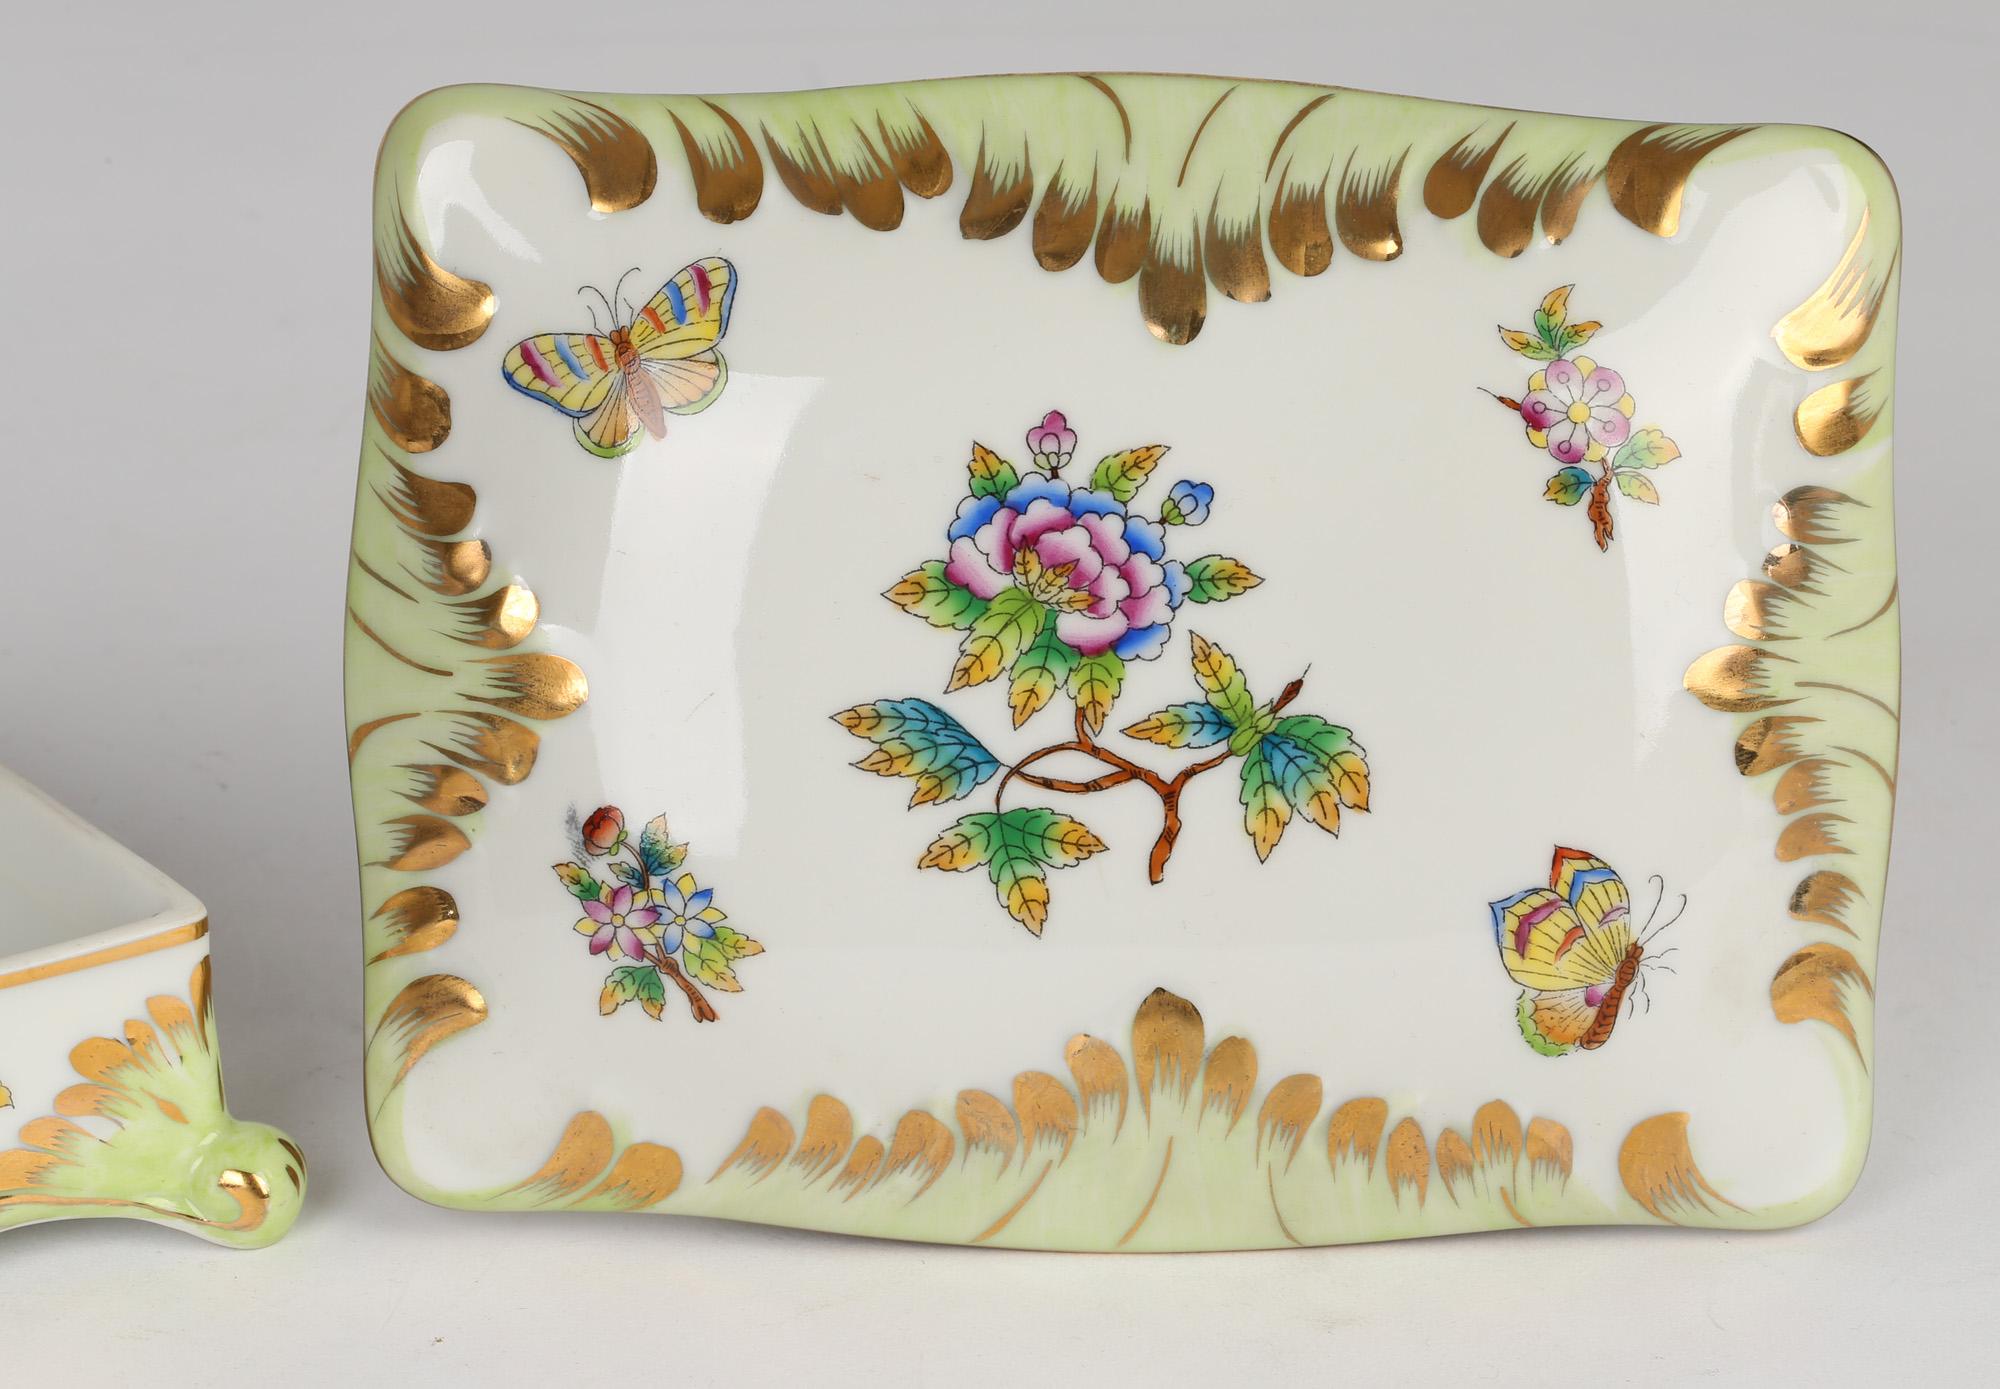 A very finely made Hungarian porcelain dressing table lidded box hand-painted with floral and butterfly designs by Herendi Porcelánmanufaktúra (Herend Porcelain Manufactory) probably dating from the mid 20th century. The rectangular shaped box